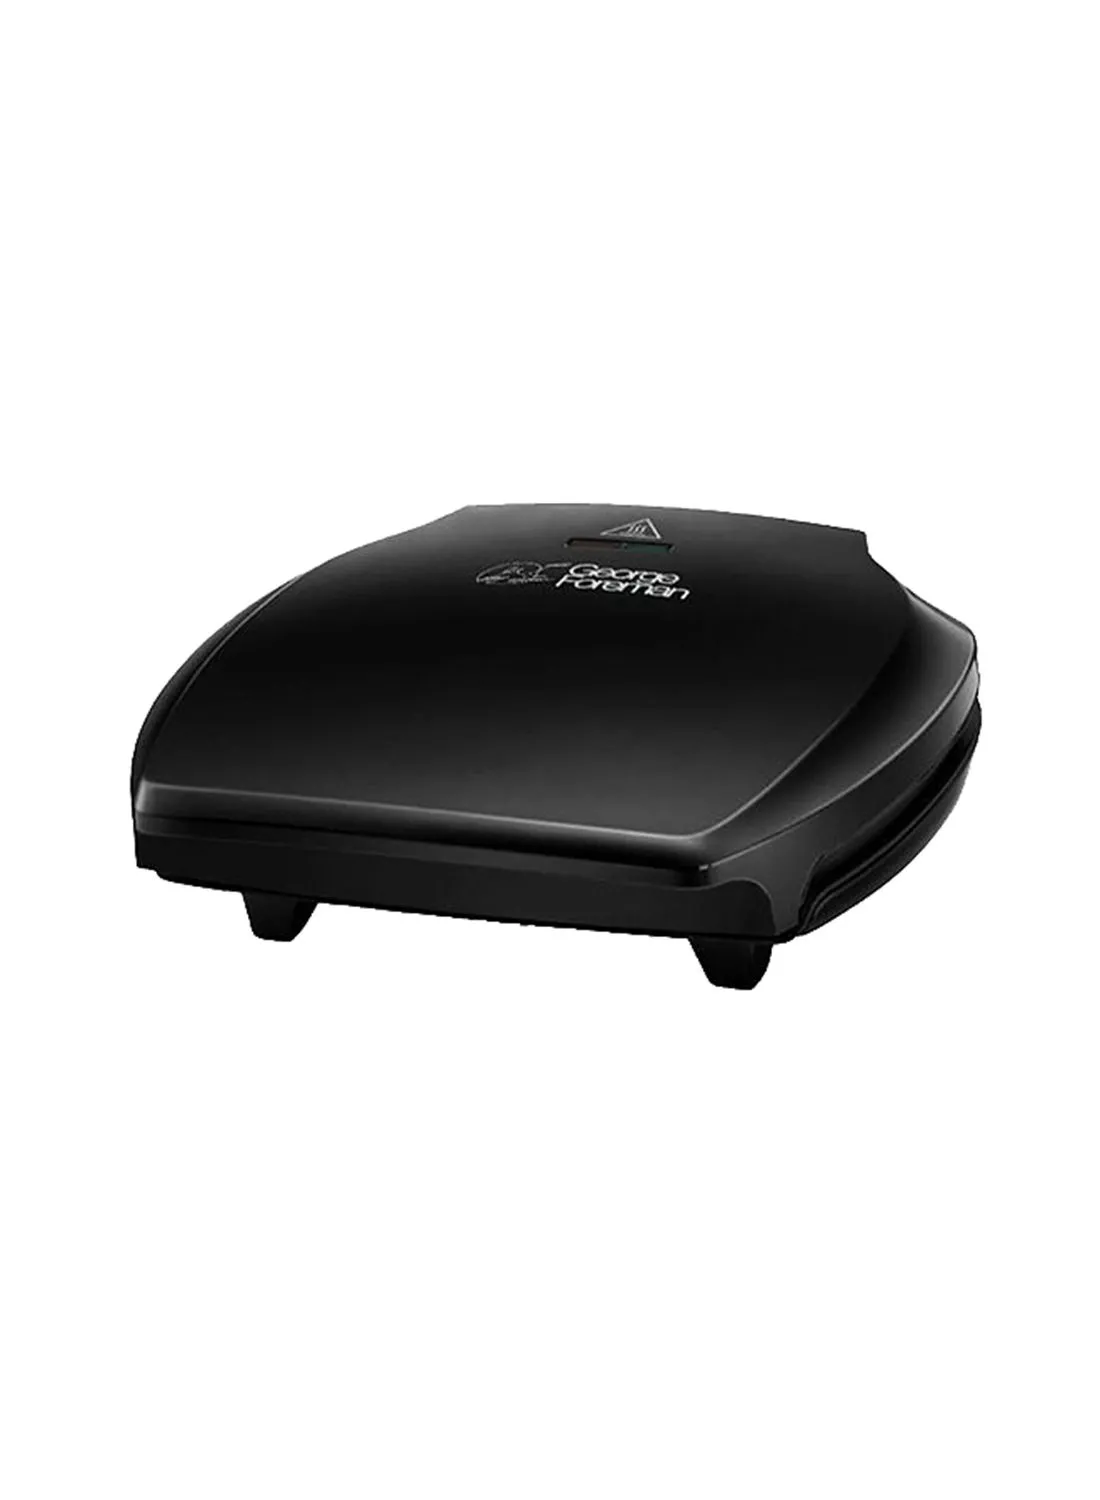 Russell Hobbs George Foreman Fat Reducing Grill 23420 Black